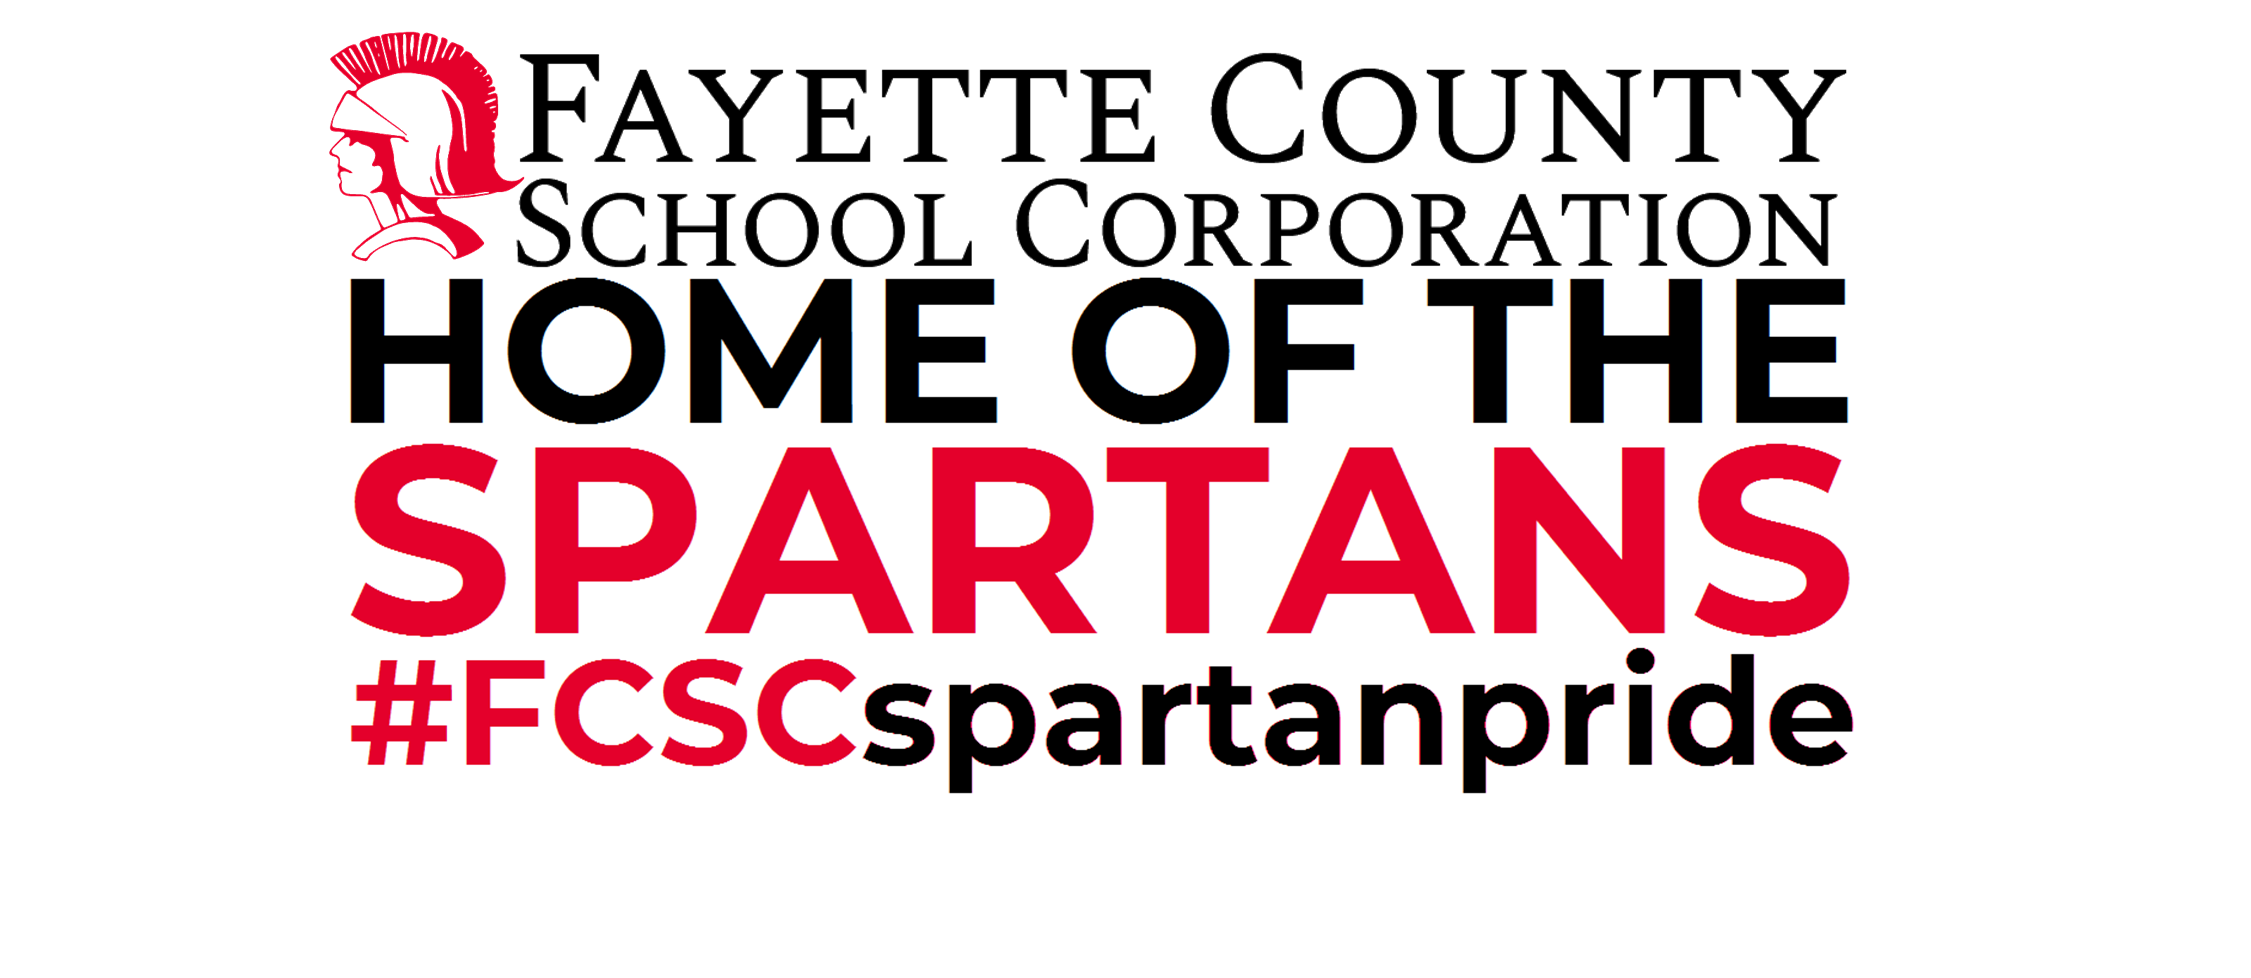 Fayette County School Corporation Home of the Spartans